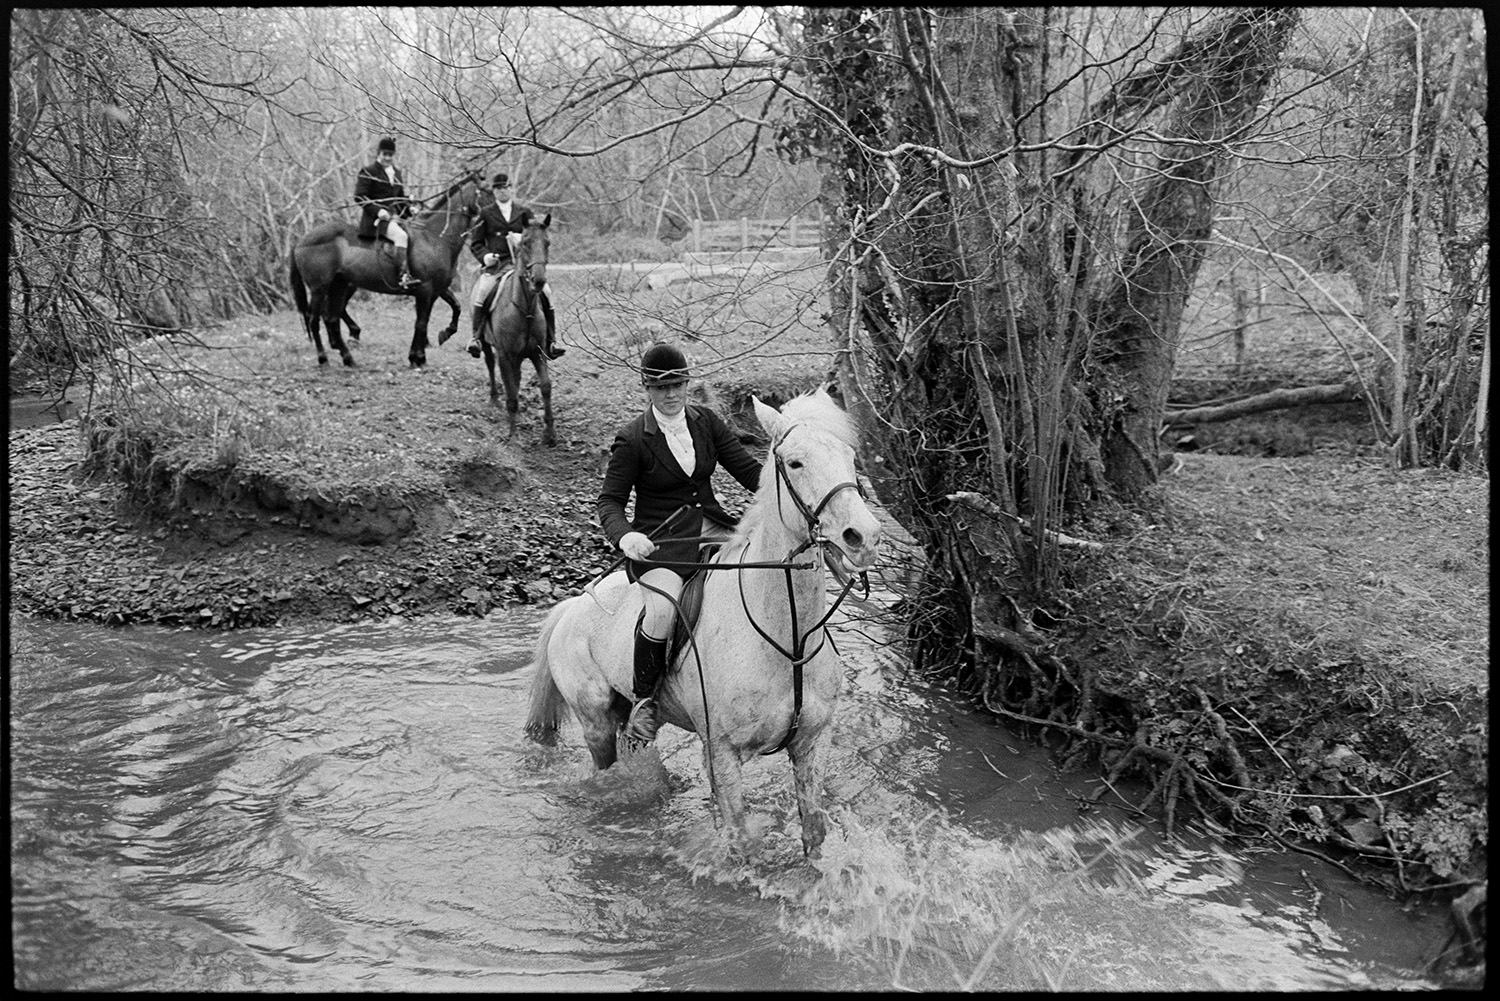 Hunt in wood, washing horses feet in stream afterwards. 
[Huntsmen riding through a stream near woodland to wash their horses feet after a hunt at Halsdon, Dolton.]